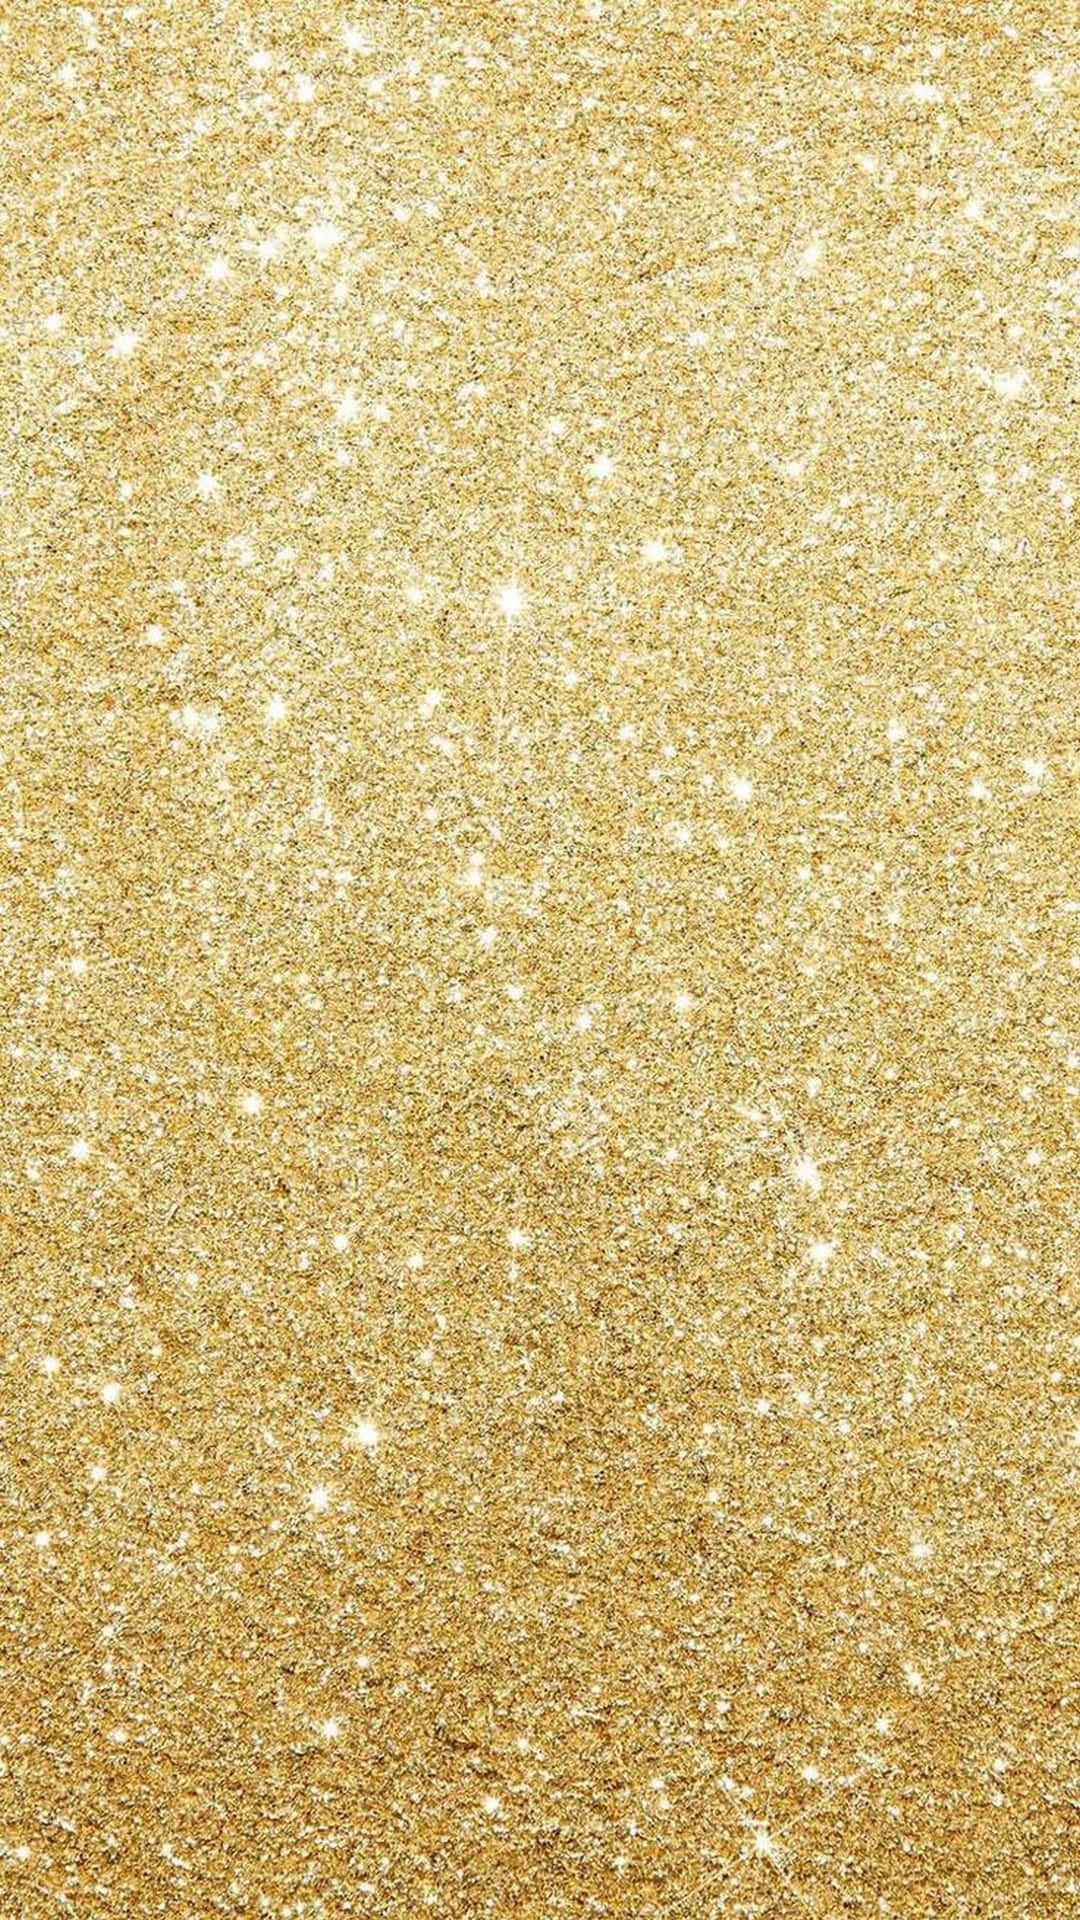 Gold Iphone Sparkling Coarse Texture Background